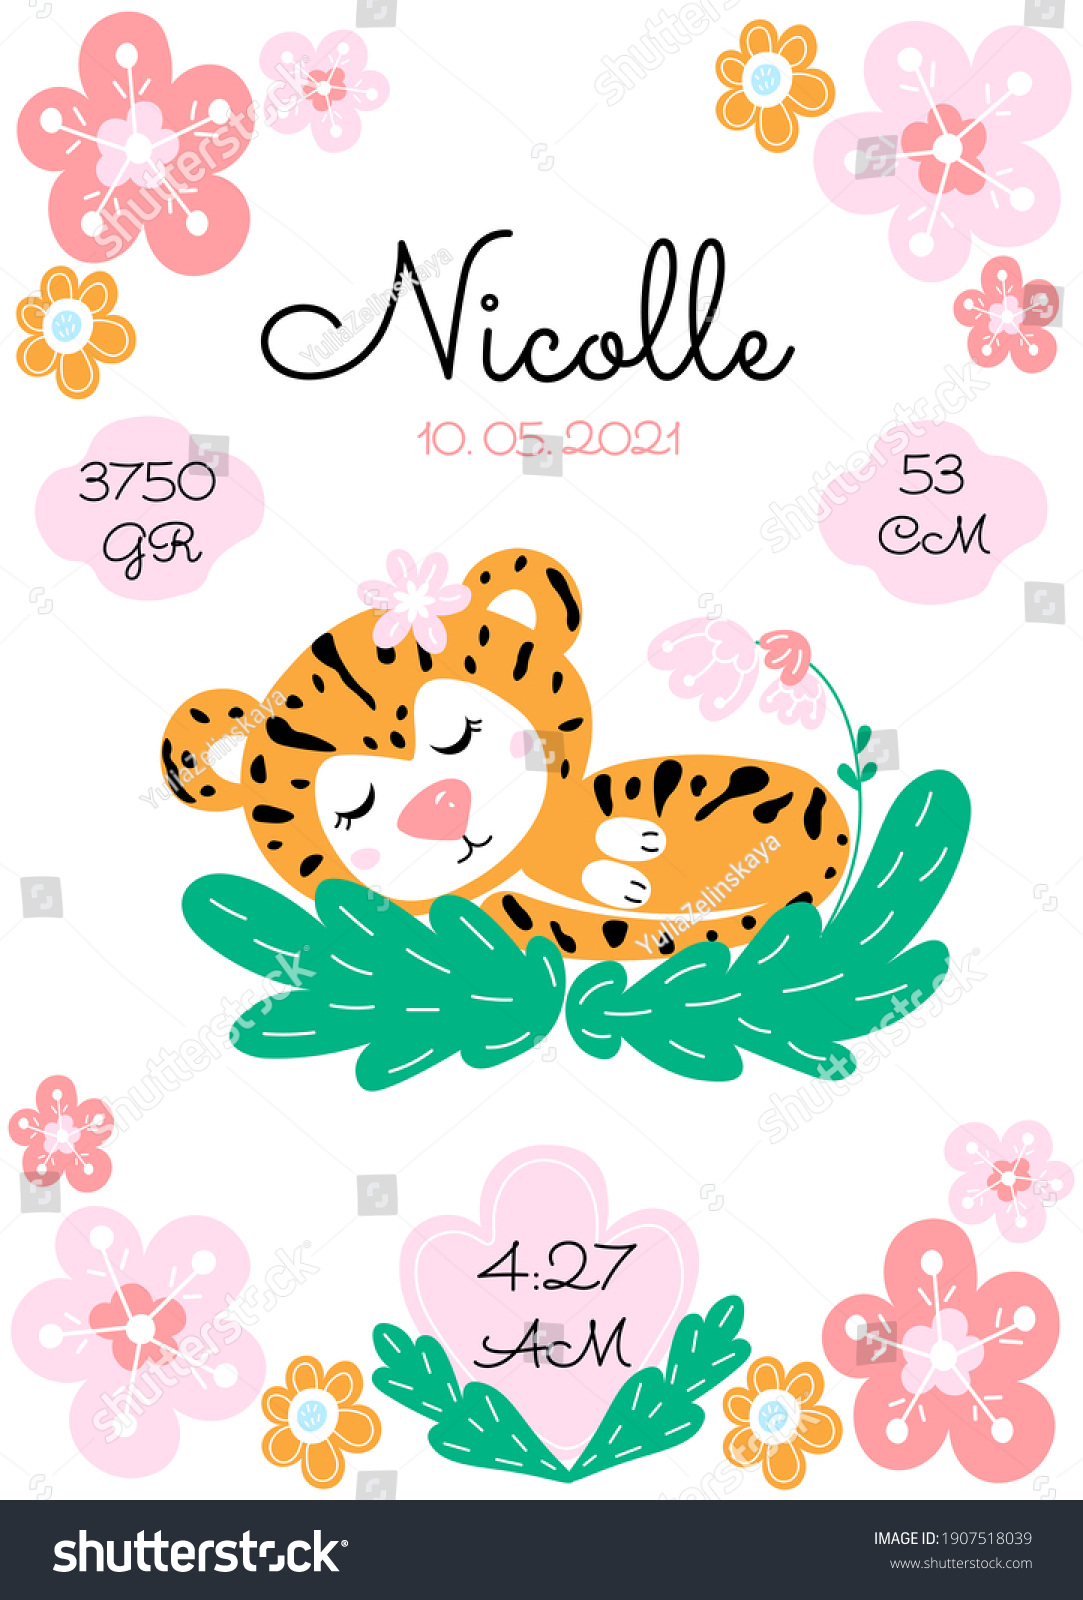 SVG of Personalize newborn baby metric poster with cute tiger and flowers on a white background. Date, cm, gr, time svg